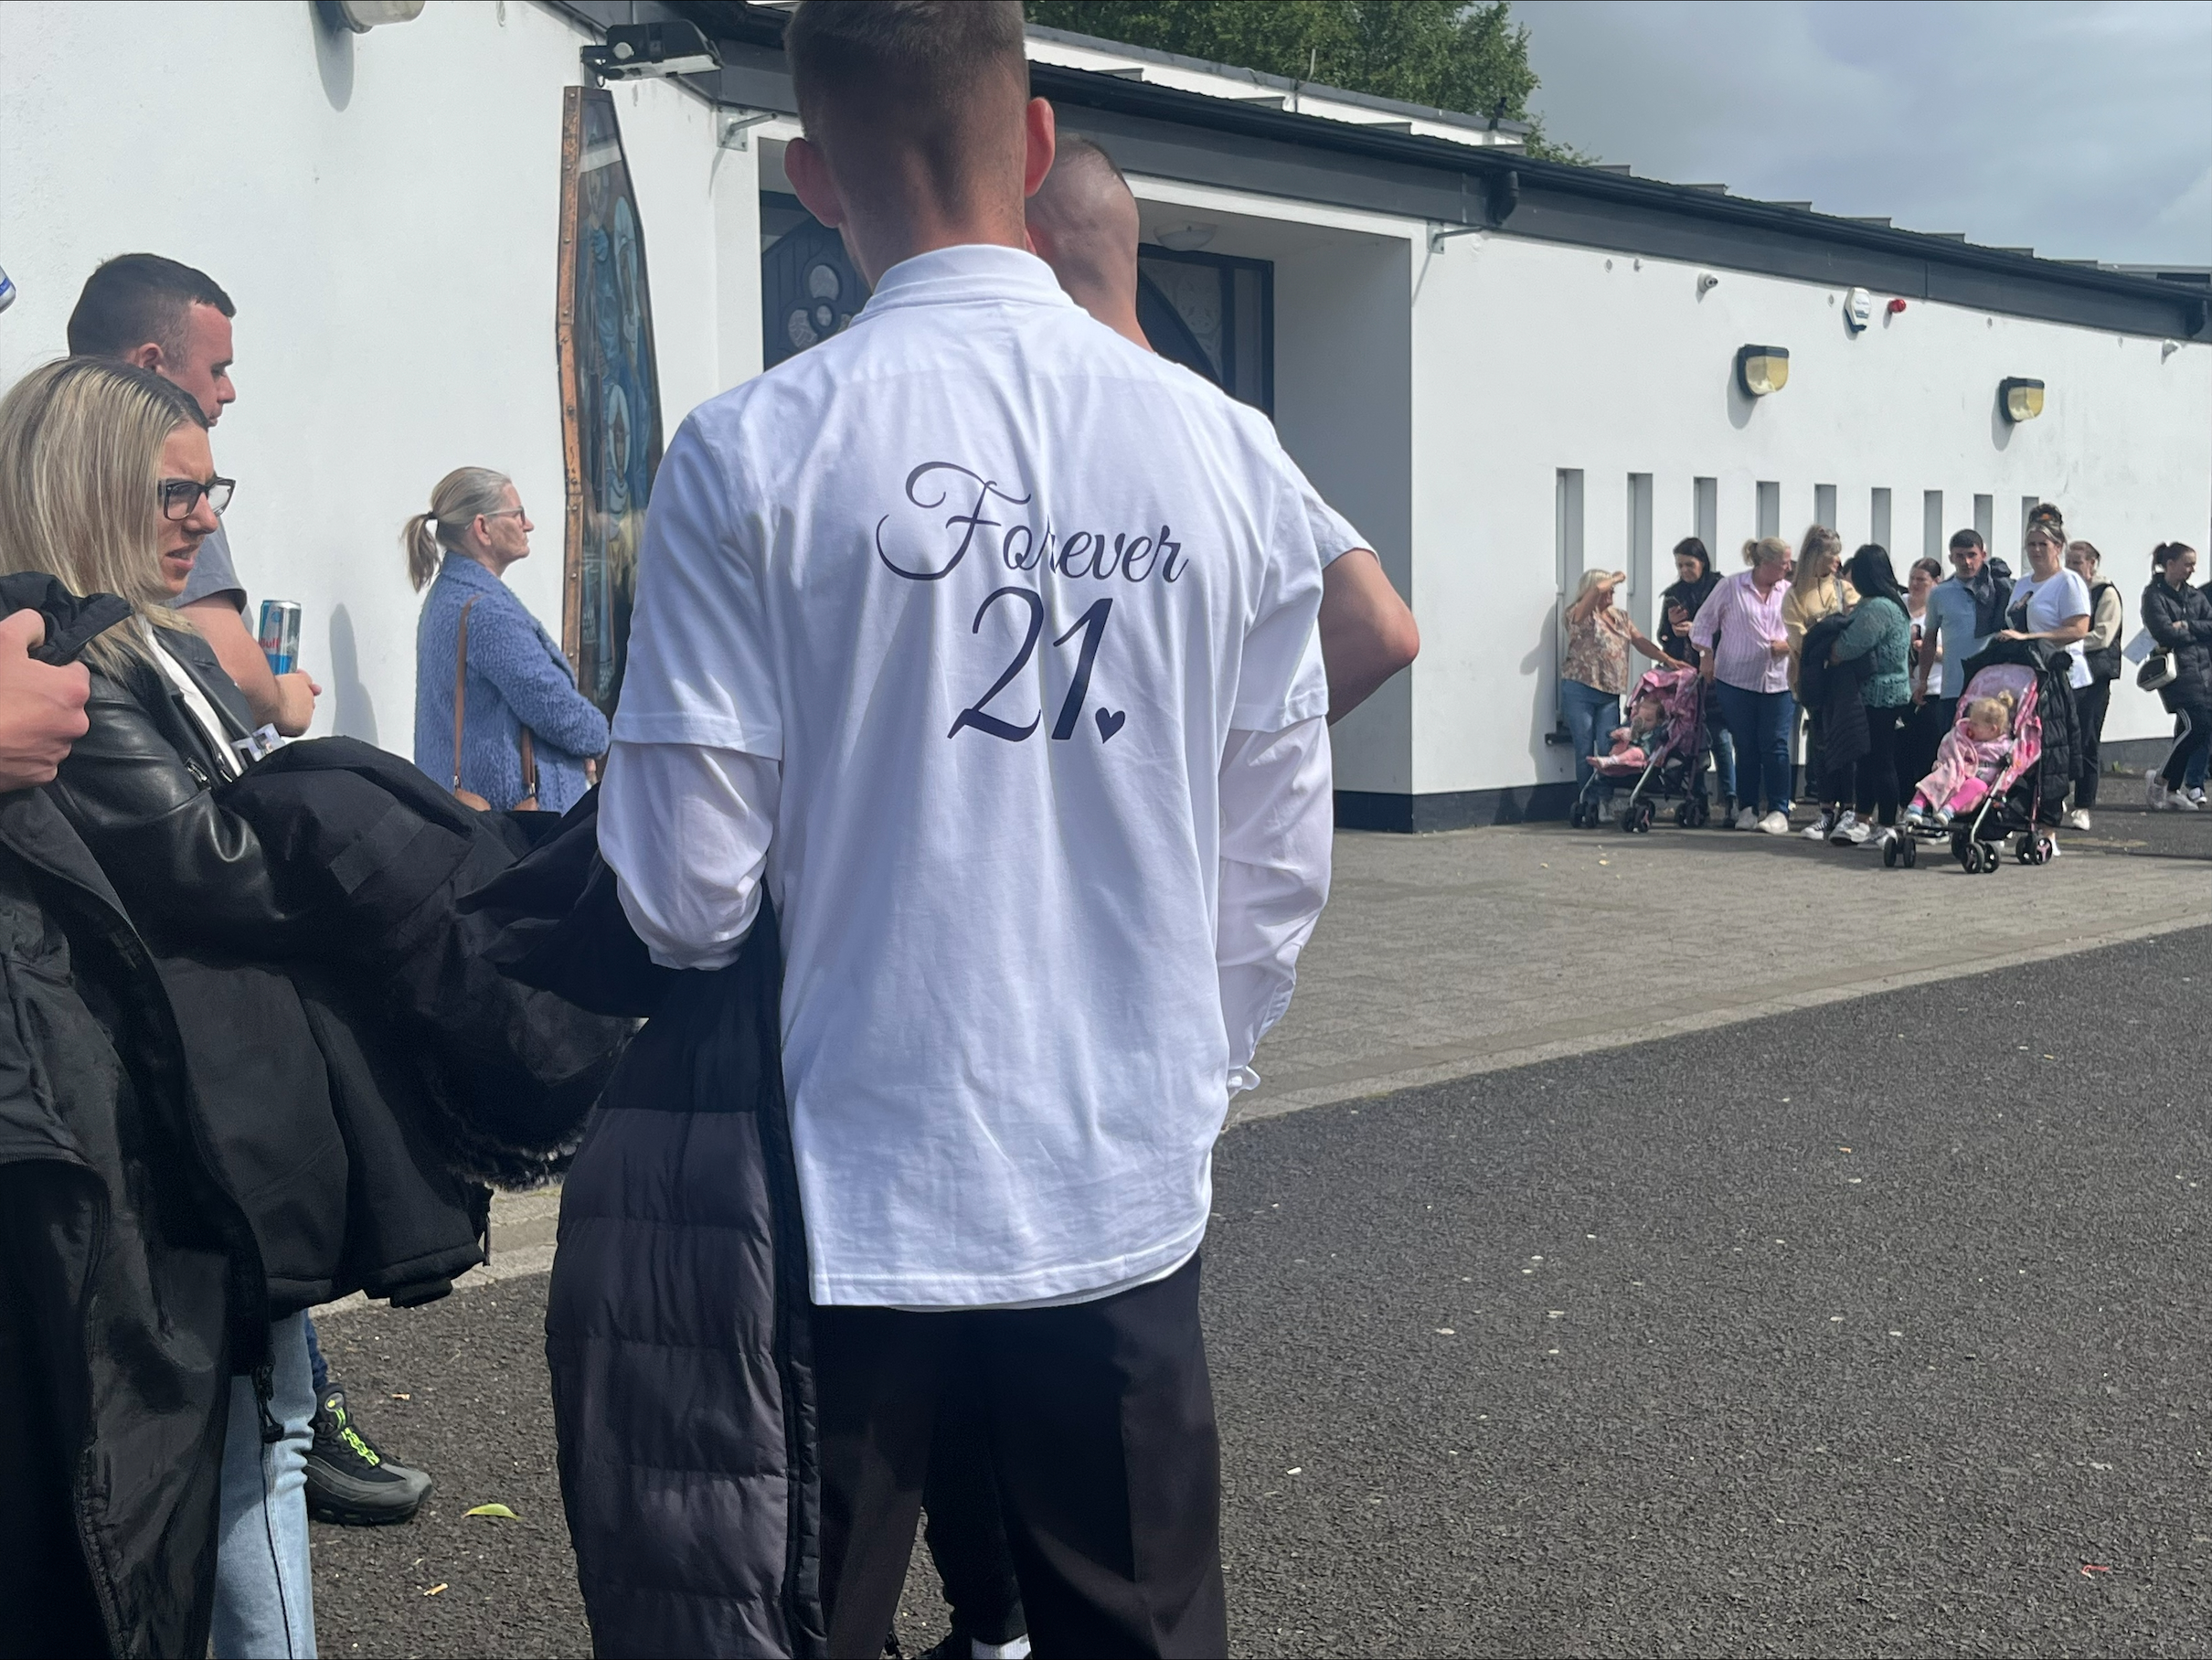 Mourner at the funeral of Rebecca Browne, wearing a t shirt with 'Forever 21' written on the back. Ms Browne died aged 21 -years-old after being hit by a Garda car. (Claudia Savage/PA)